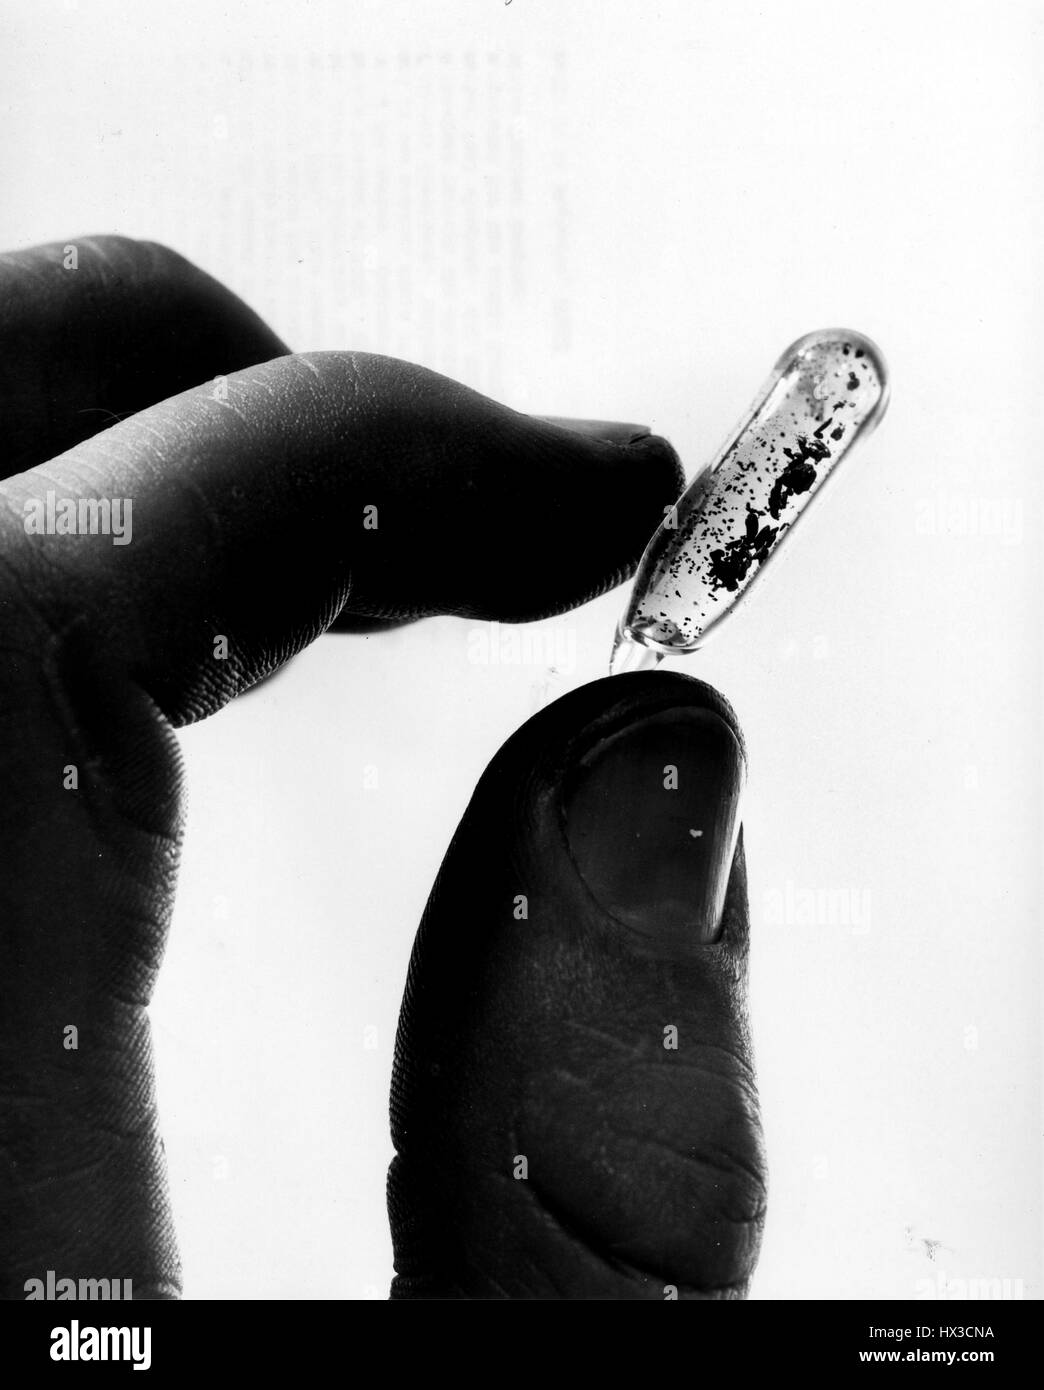 The small amount of material shown in the vial represents more than 14 years of production in the atomic energy field related to the betterment of mankind, 1961. Image courtesy US Department of Energy. Stock Photo